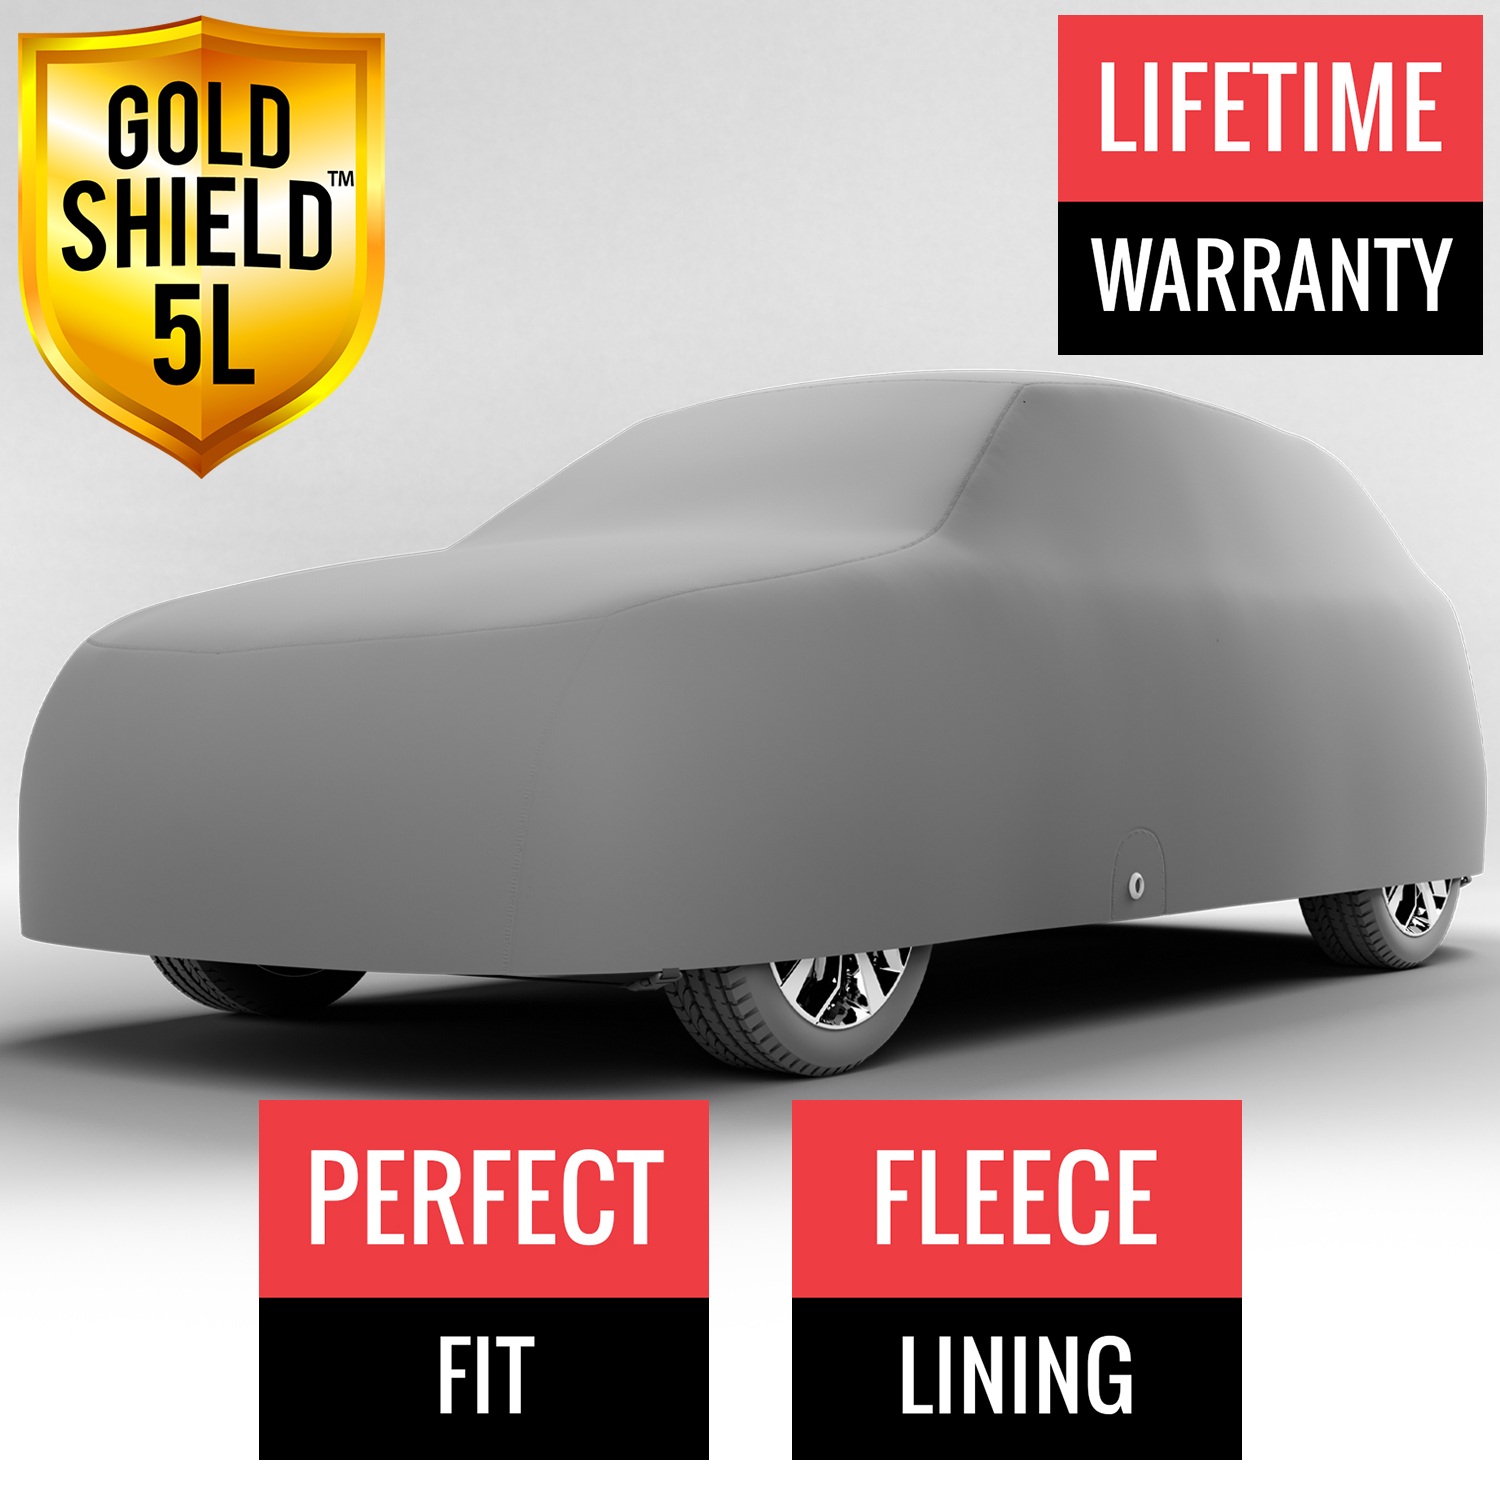 Gold Shield 5L - Car Cover for Toyota Prius V 2014 Wagon 4-Door